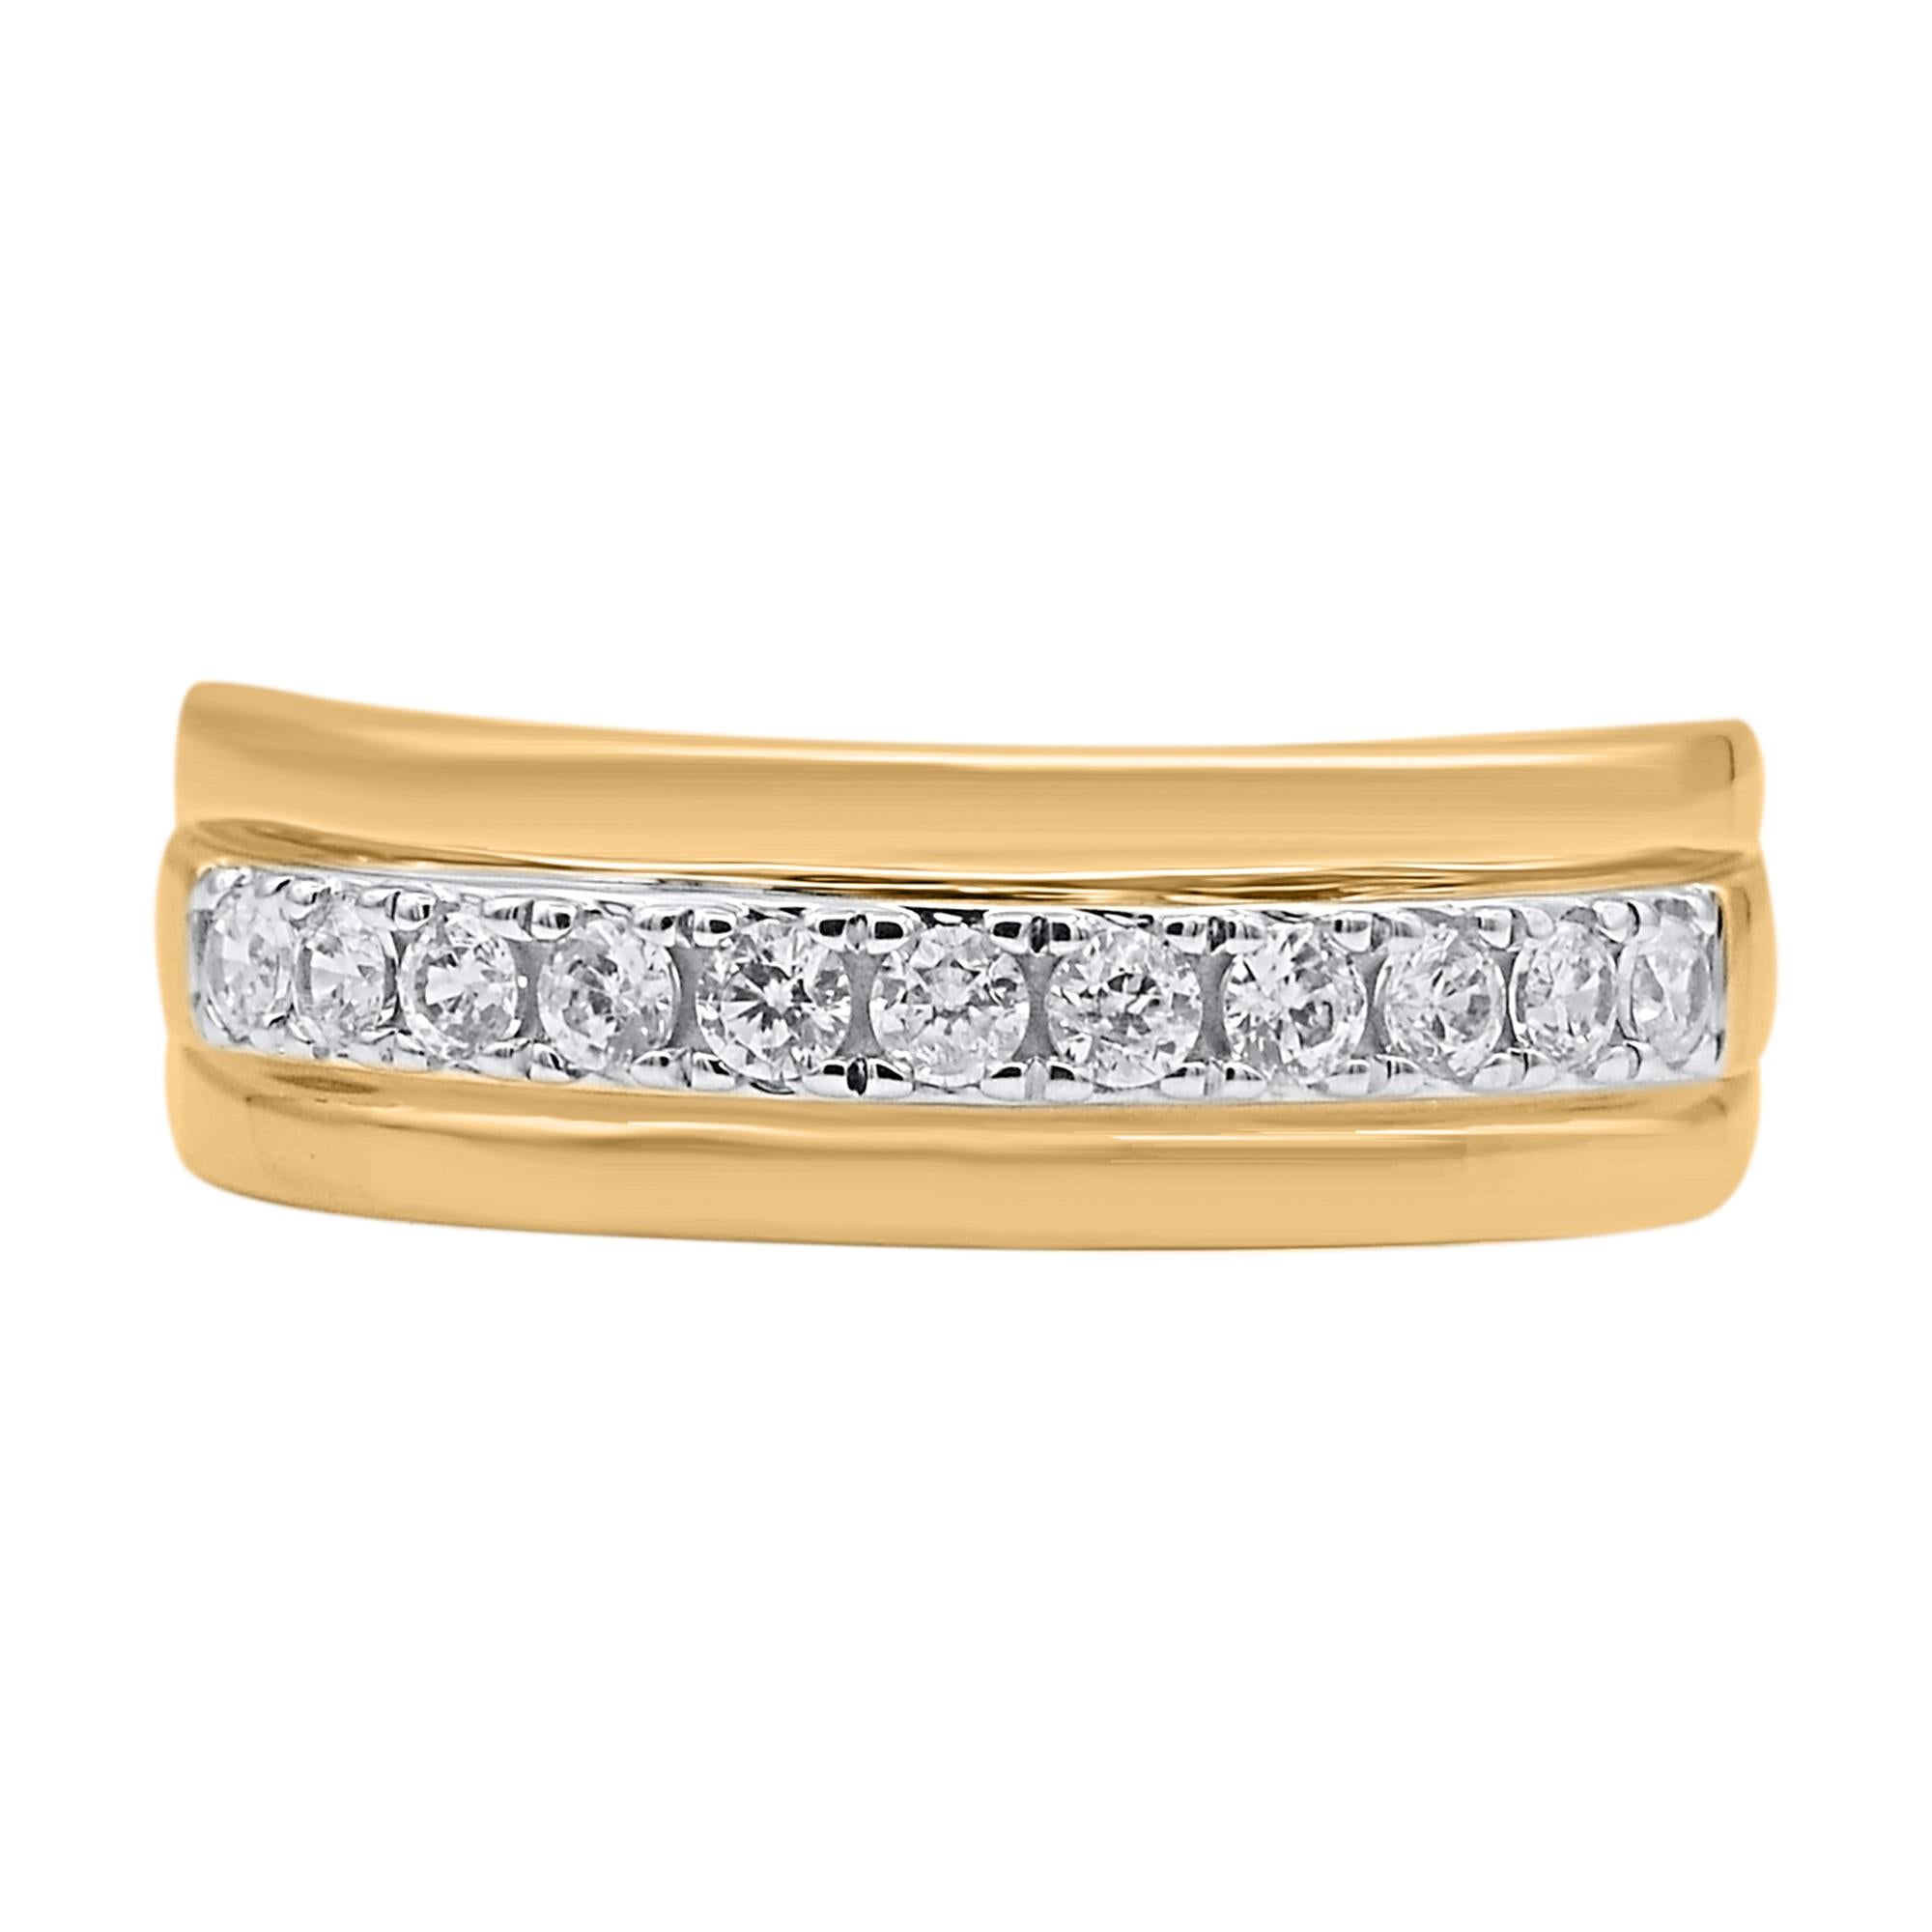 Contemporary TJD 0.50 Carat Brilliant Cut Natural Diamond 18KT Yellow Gold Men's Band Ring For Sale